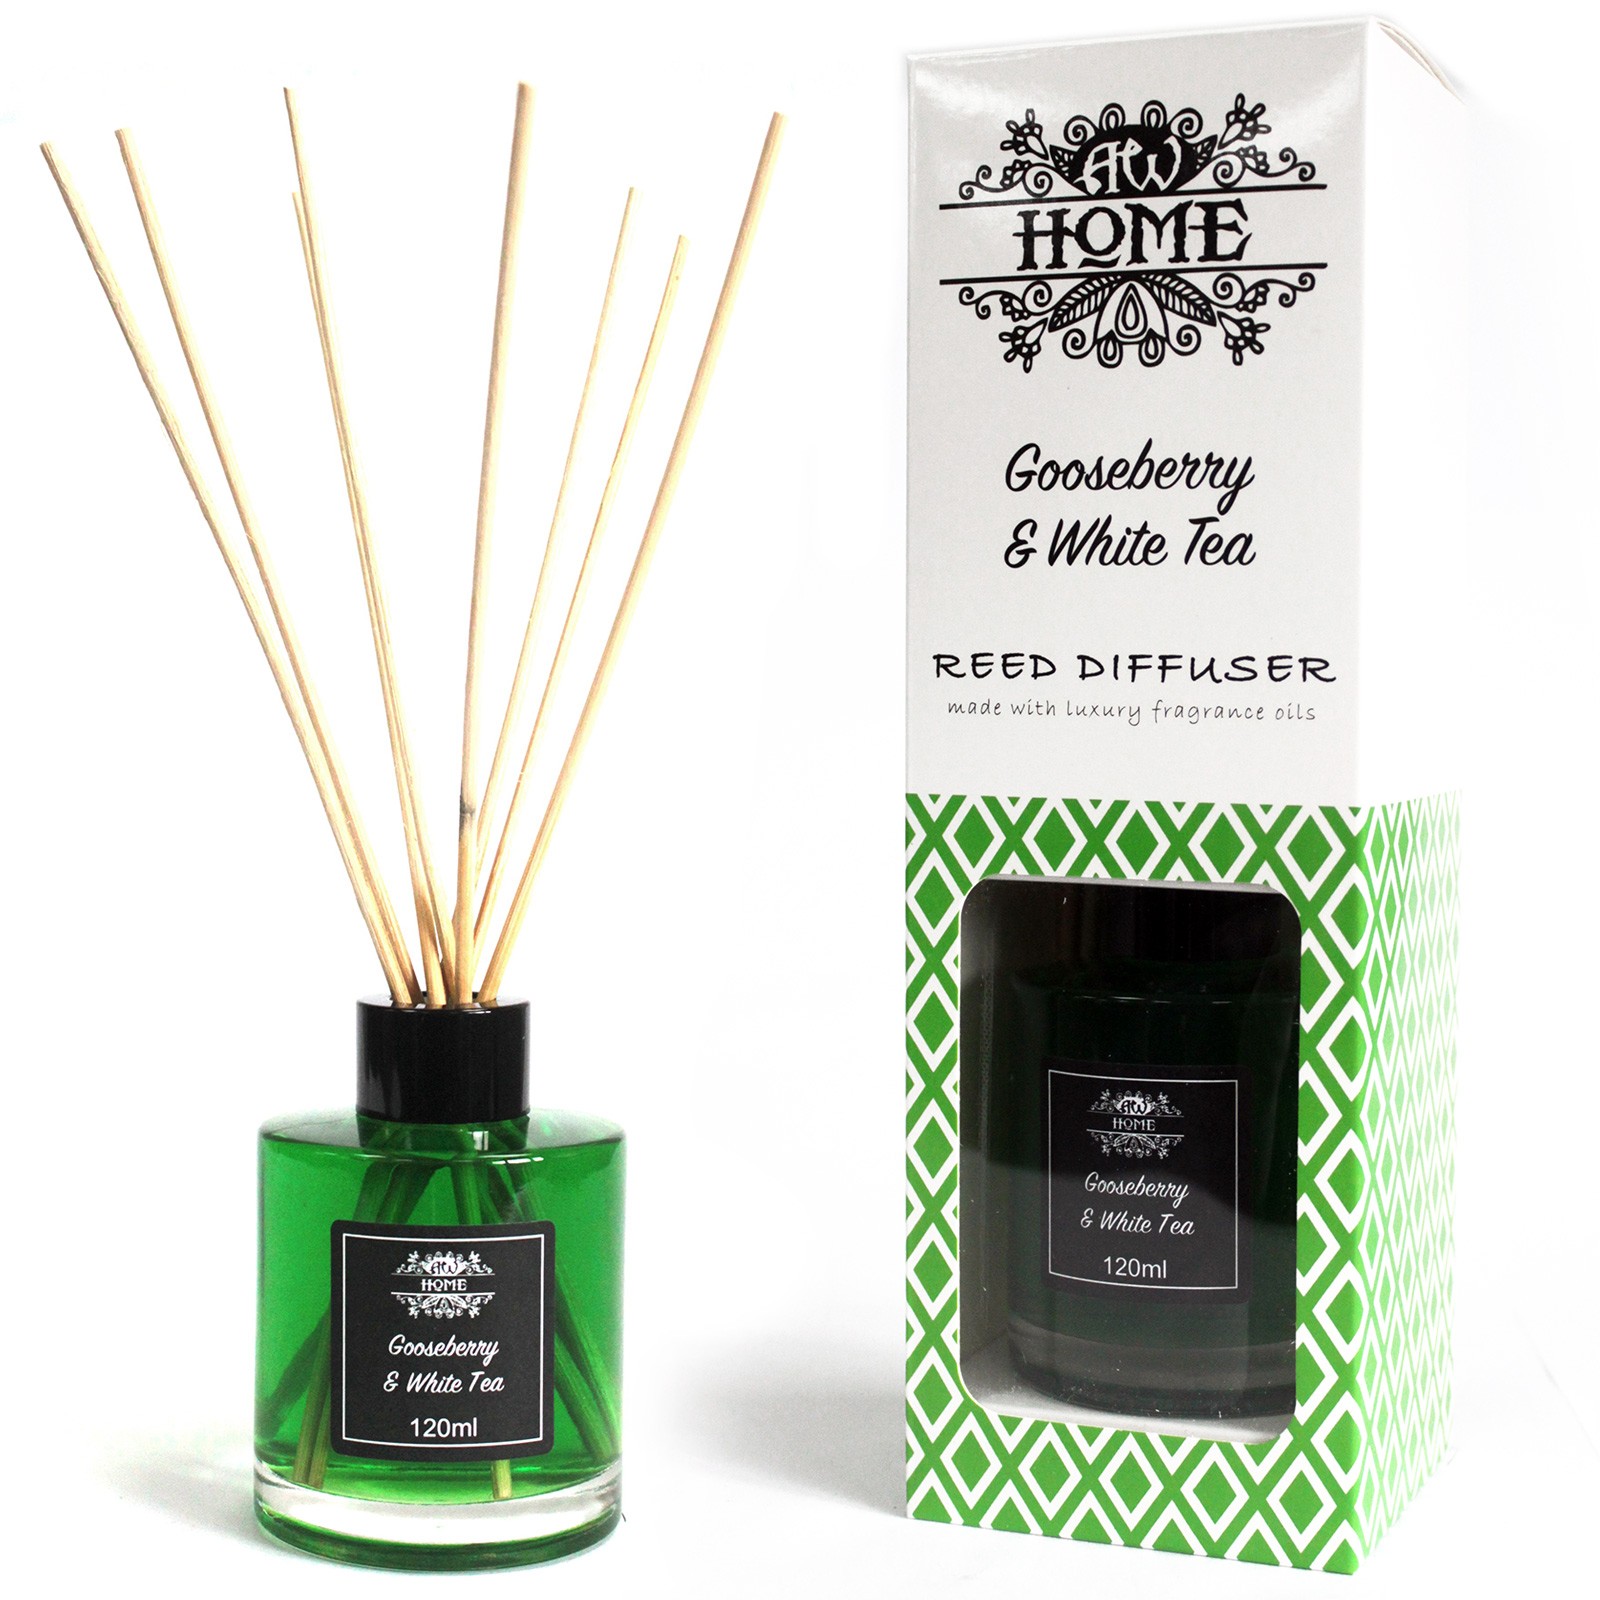 Gooseberry & White Tea - Home Fragrance Reed Diffuser - 120ml With Reeds